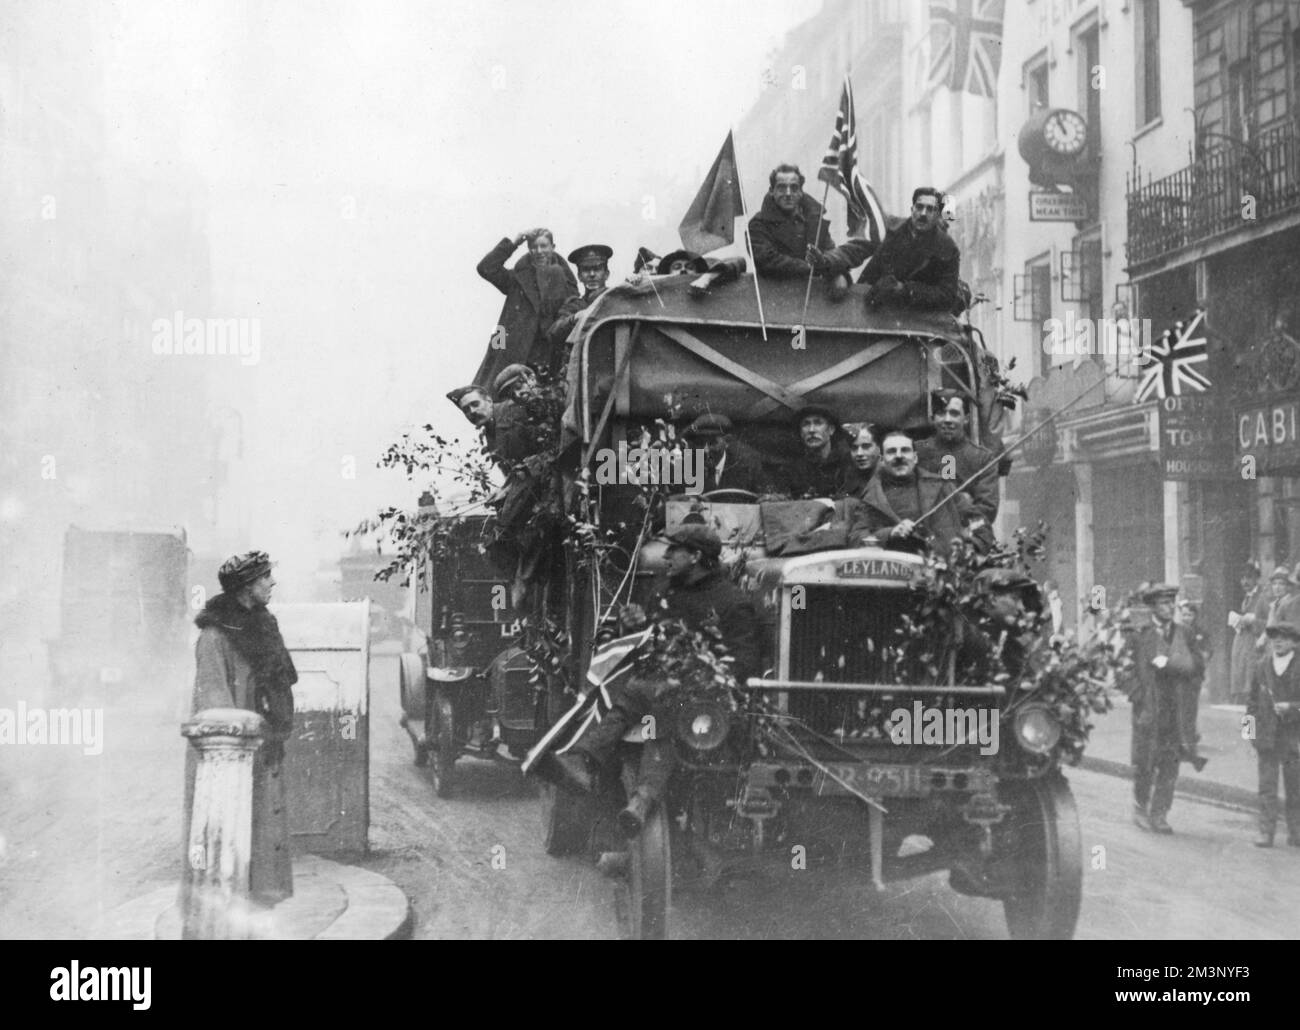 A Leyland lorry in London filled with men celebrating Armistice Day on 11th November 1918. Some wear military uniform, others civilian clothes.  11th November 1918 Stock Photo